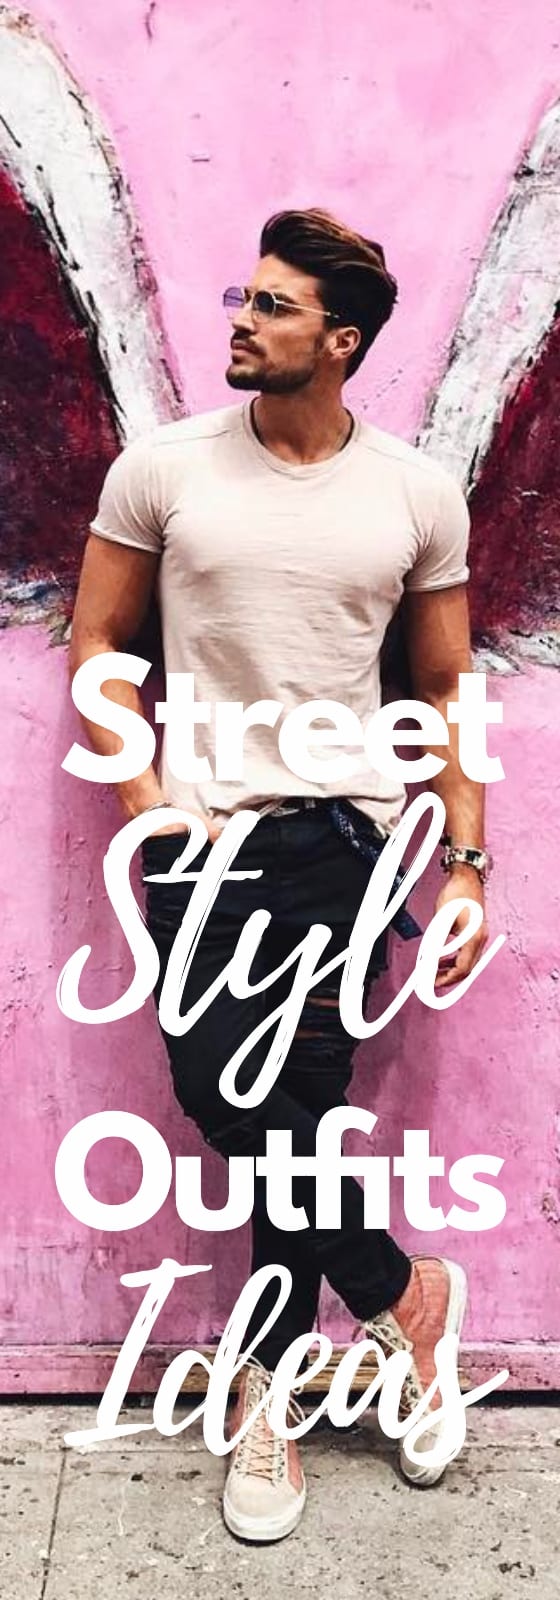 10 Street Style Outfit Ideas For Men To Choose From